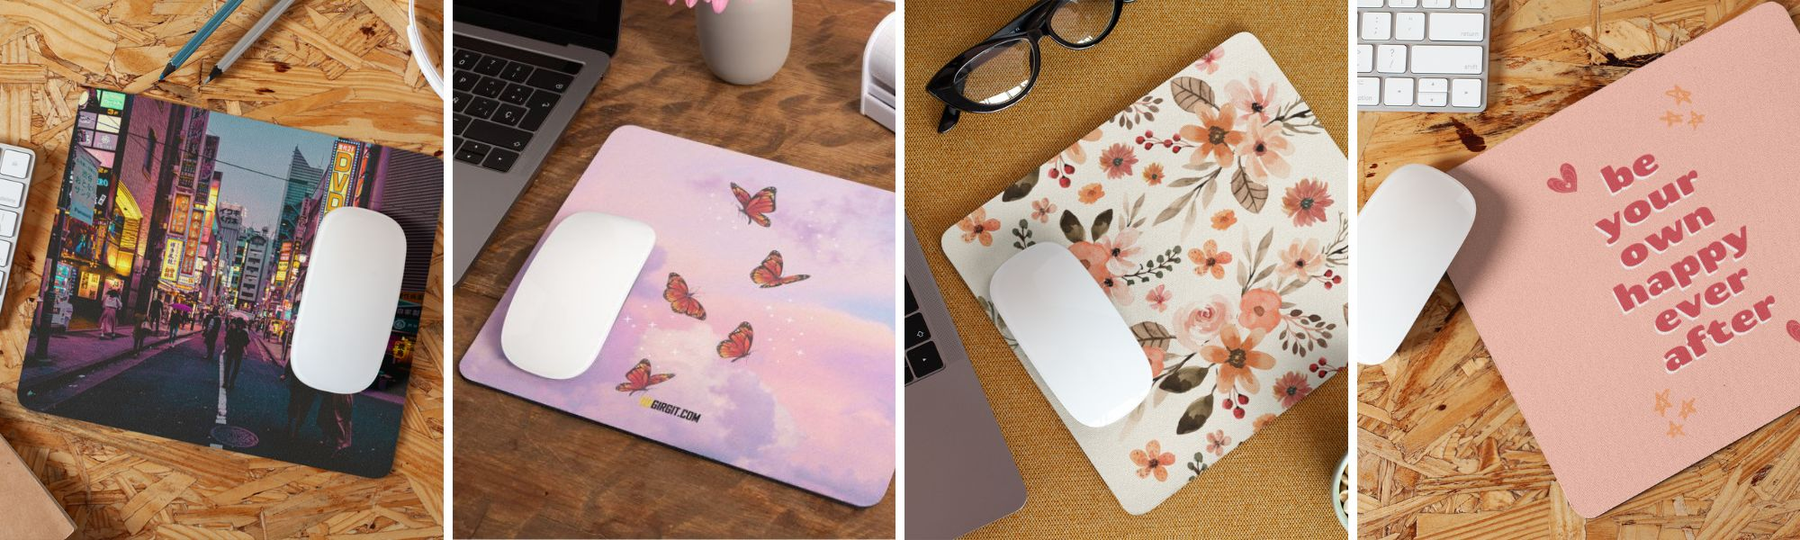 sublimation-printed-mouse-pad-banner-collection-page-gogirgit